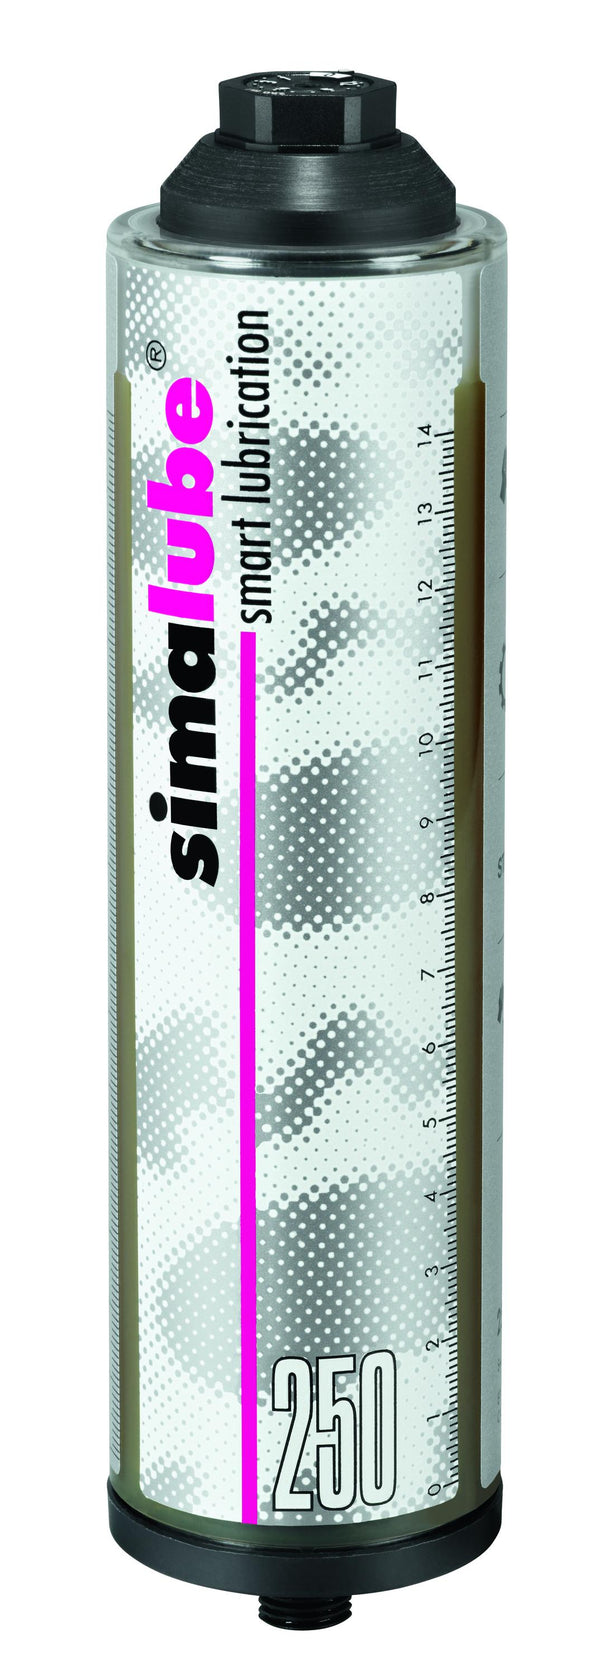 Simalube lubrication cartridge filled with chain oil 250ml